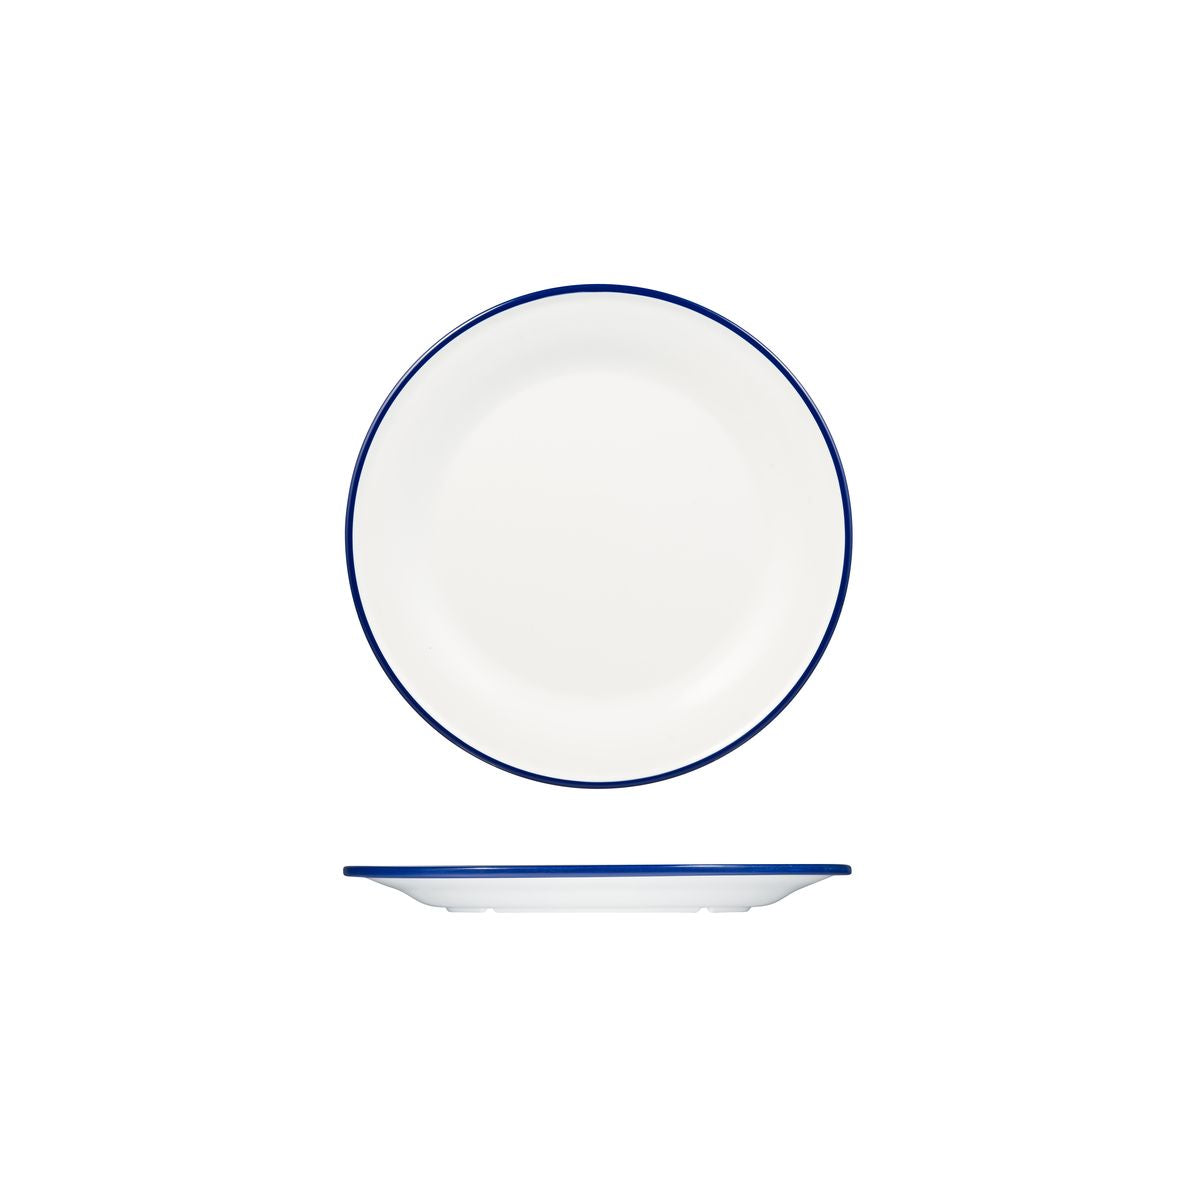 Round Plate, 220mm, Melamine - White & Blue from Ryner Melamine. Sold in boxes of 12. Hospitality quality at wholesale price with The Flying Fork! 